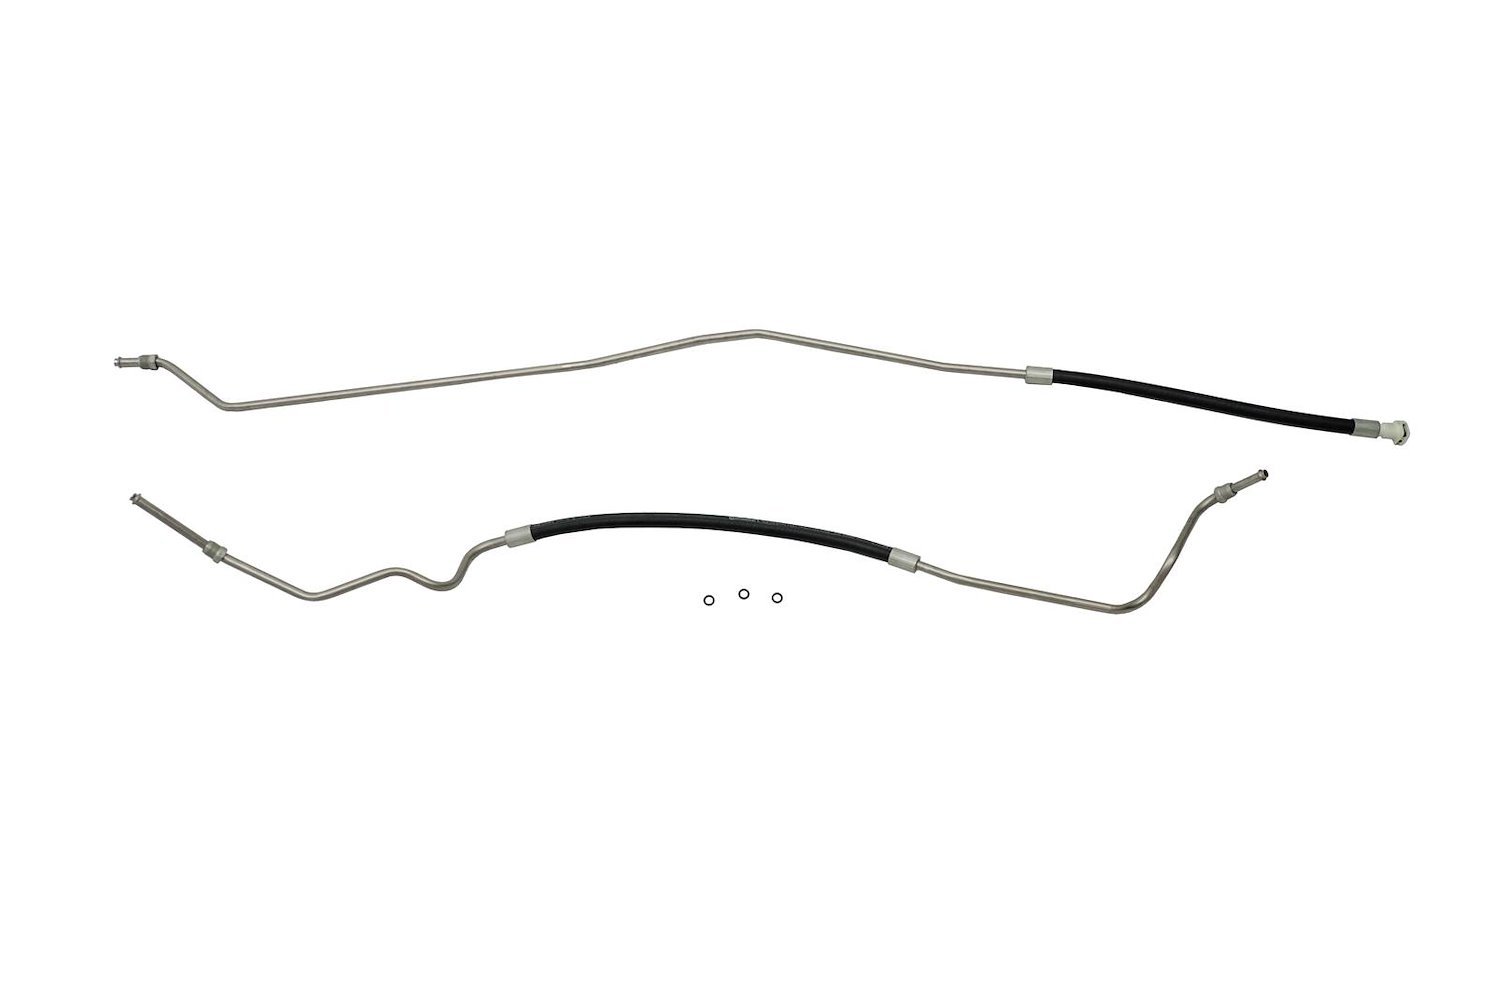 Chevy / GMC Pick Up Fuel Supply Line -1996 1997 1998 1999 2000